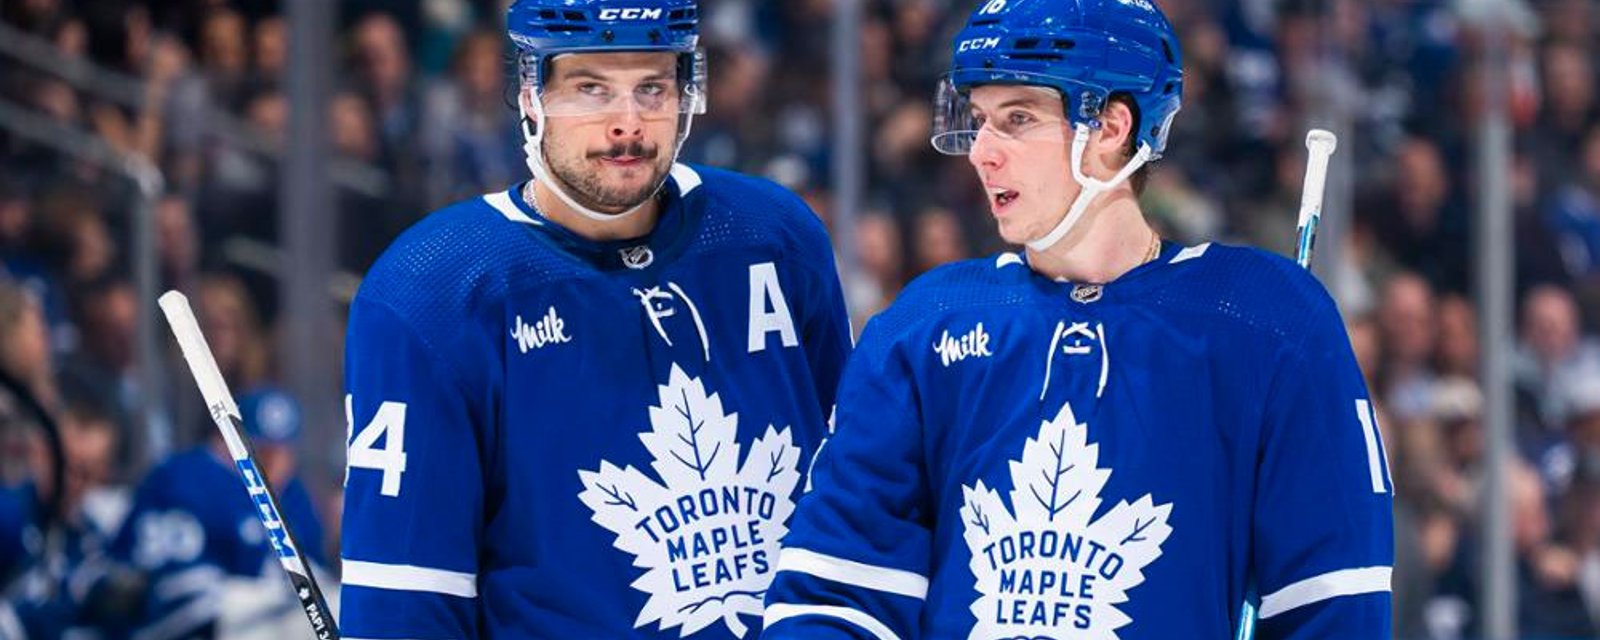 Multiple controversies affecting Leafs ahead of Game 1 